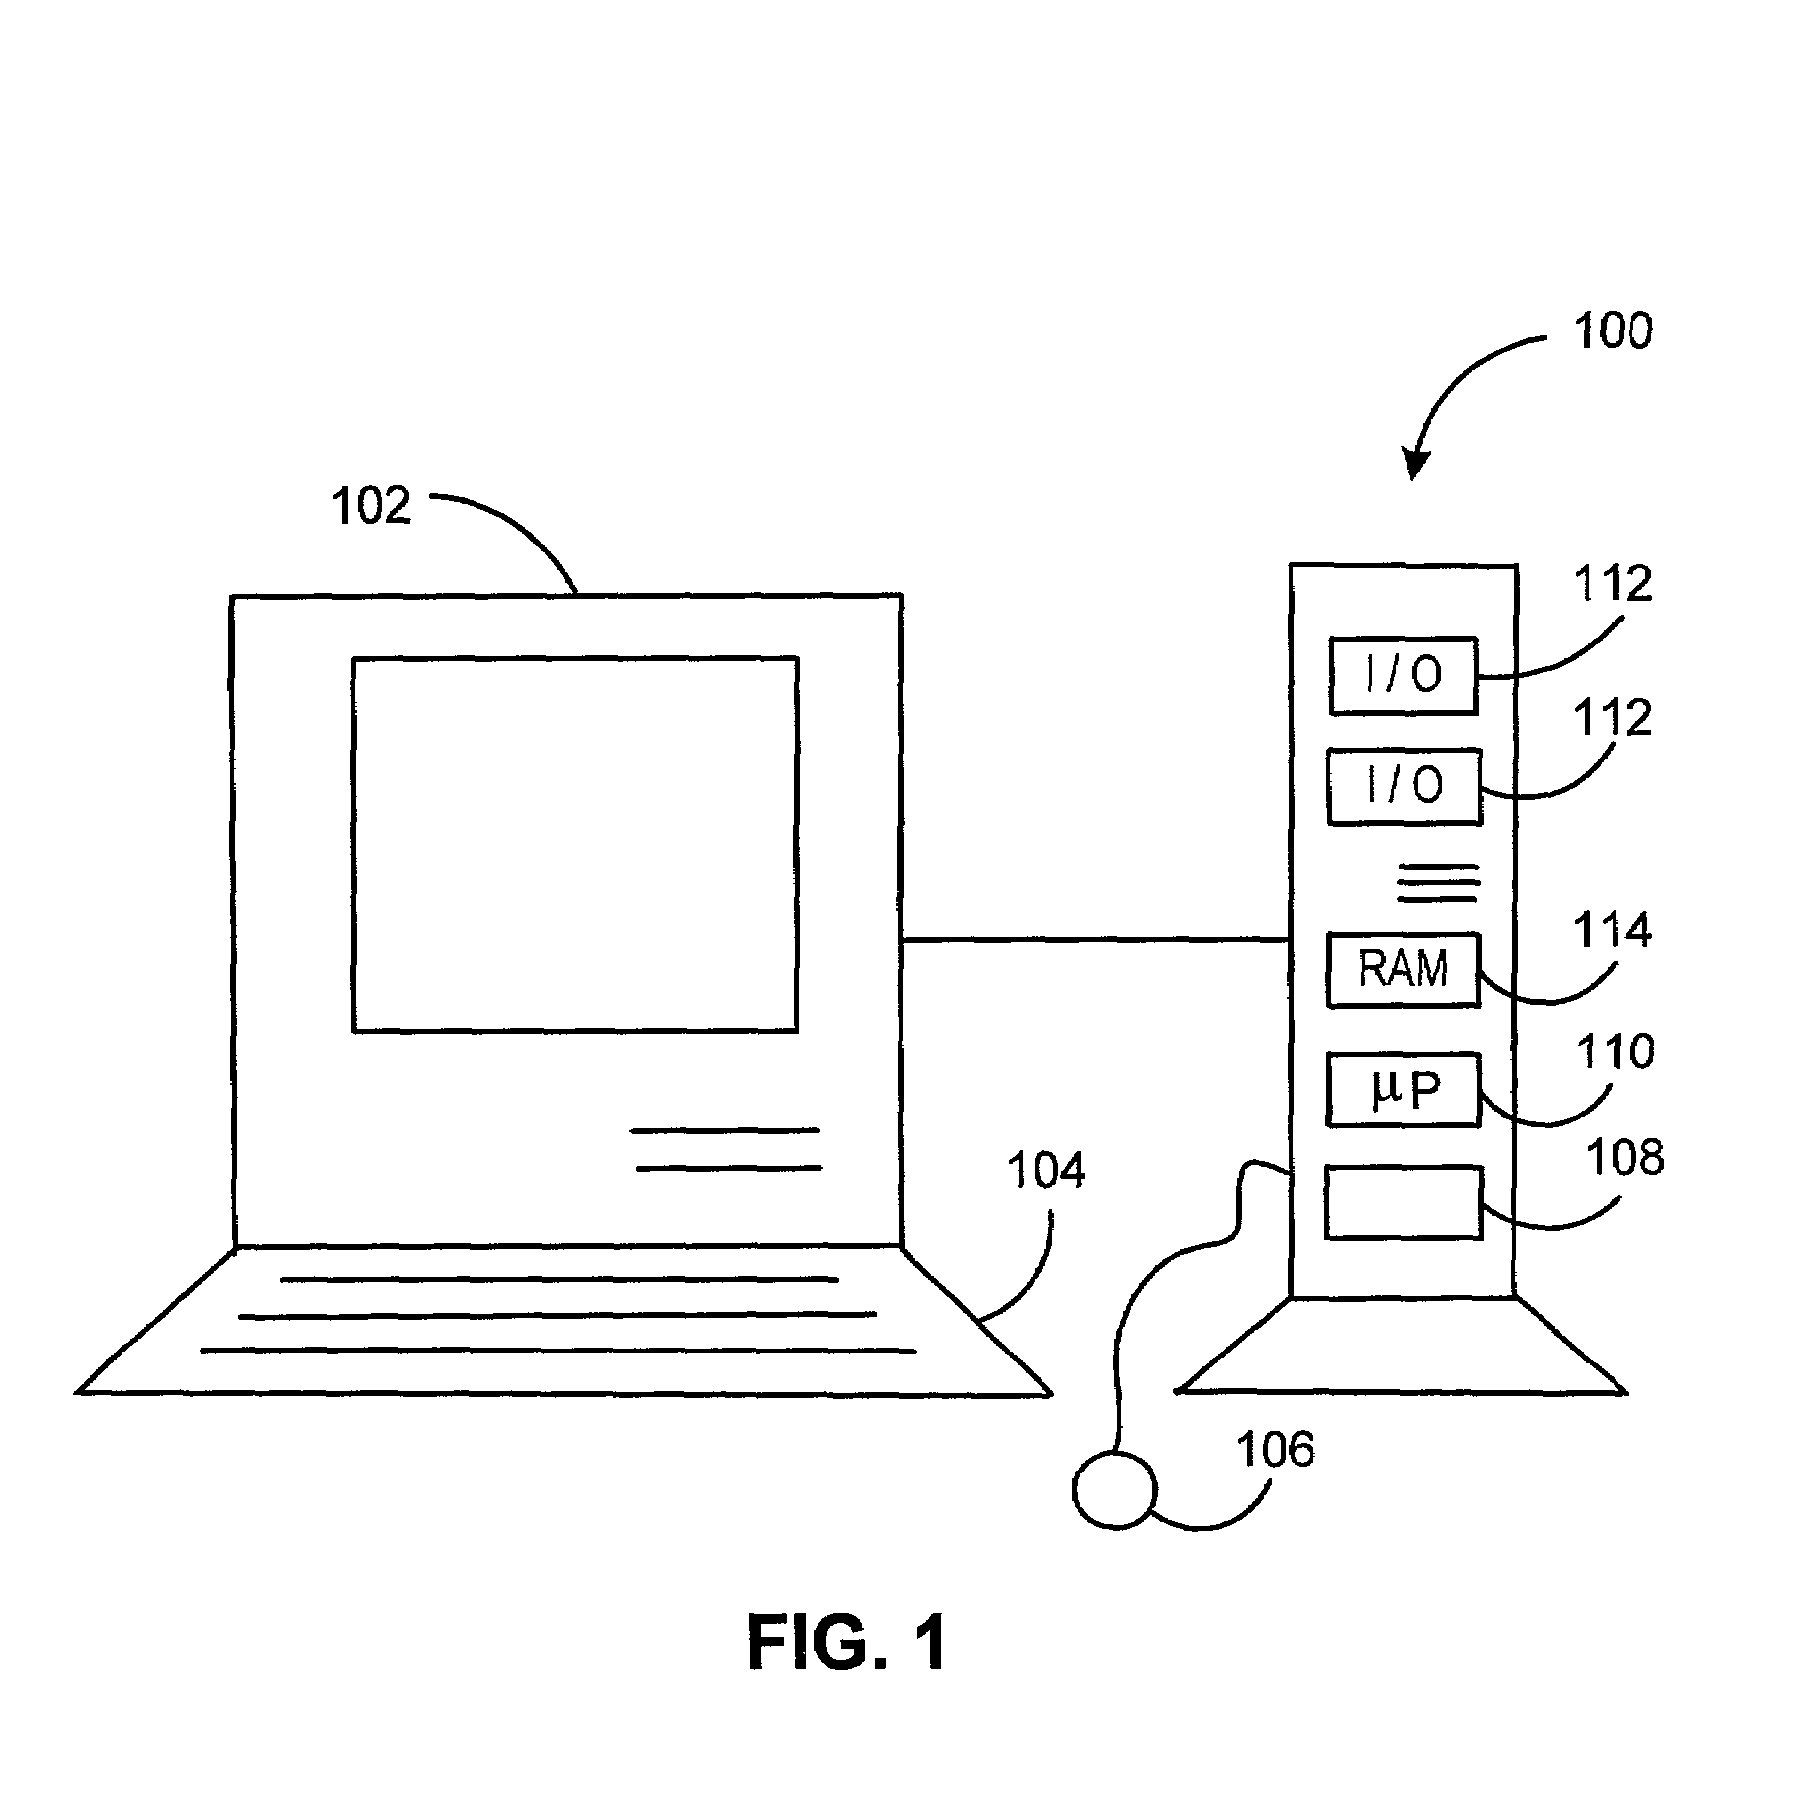 Method of addressing and sorting an interoffice distribution using an incoming mail sorting apparatus